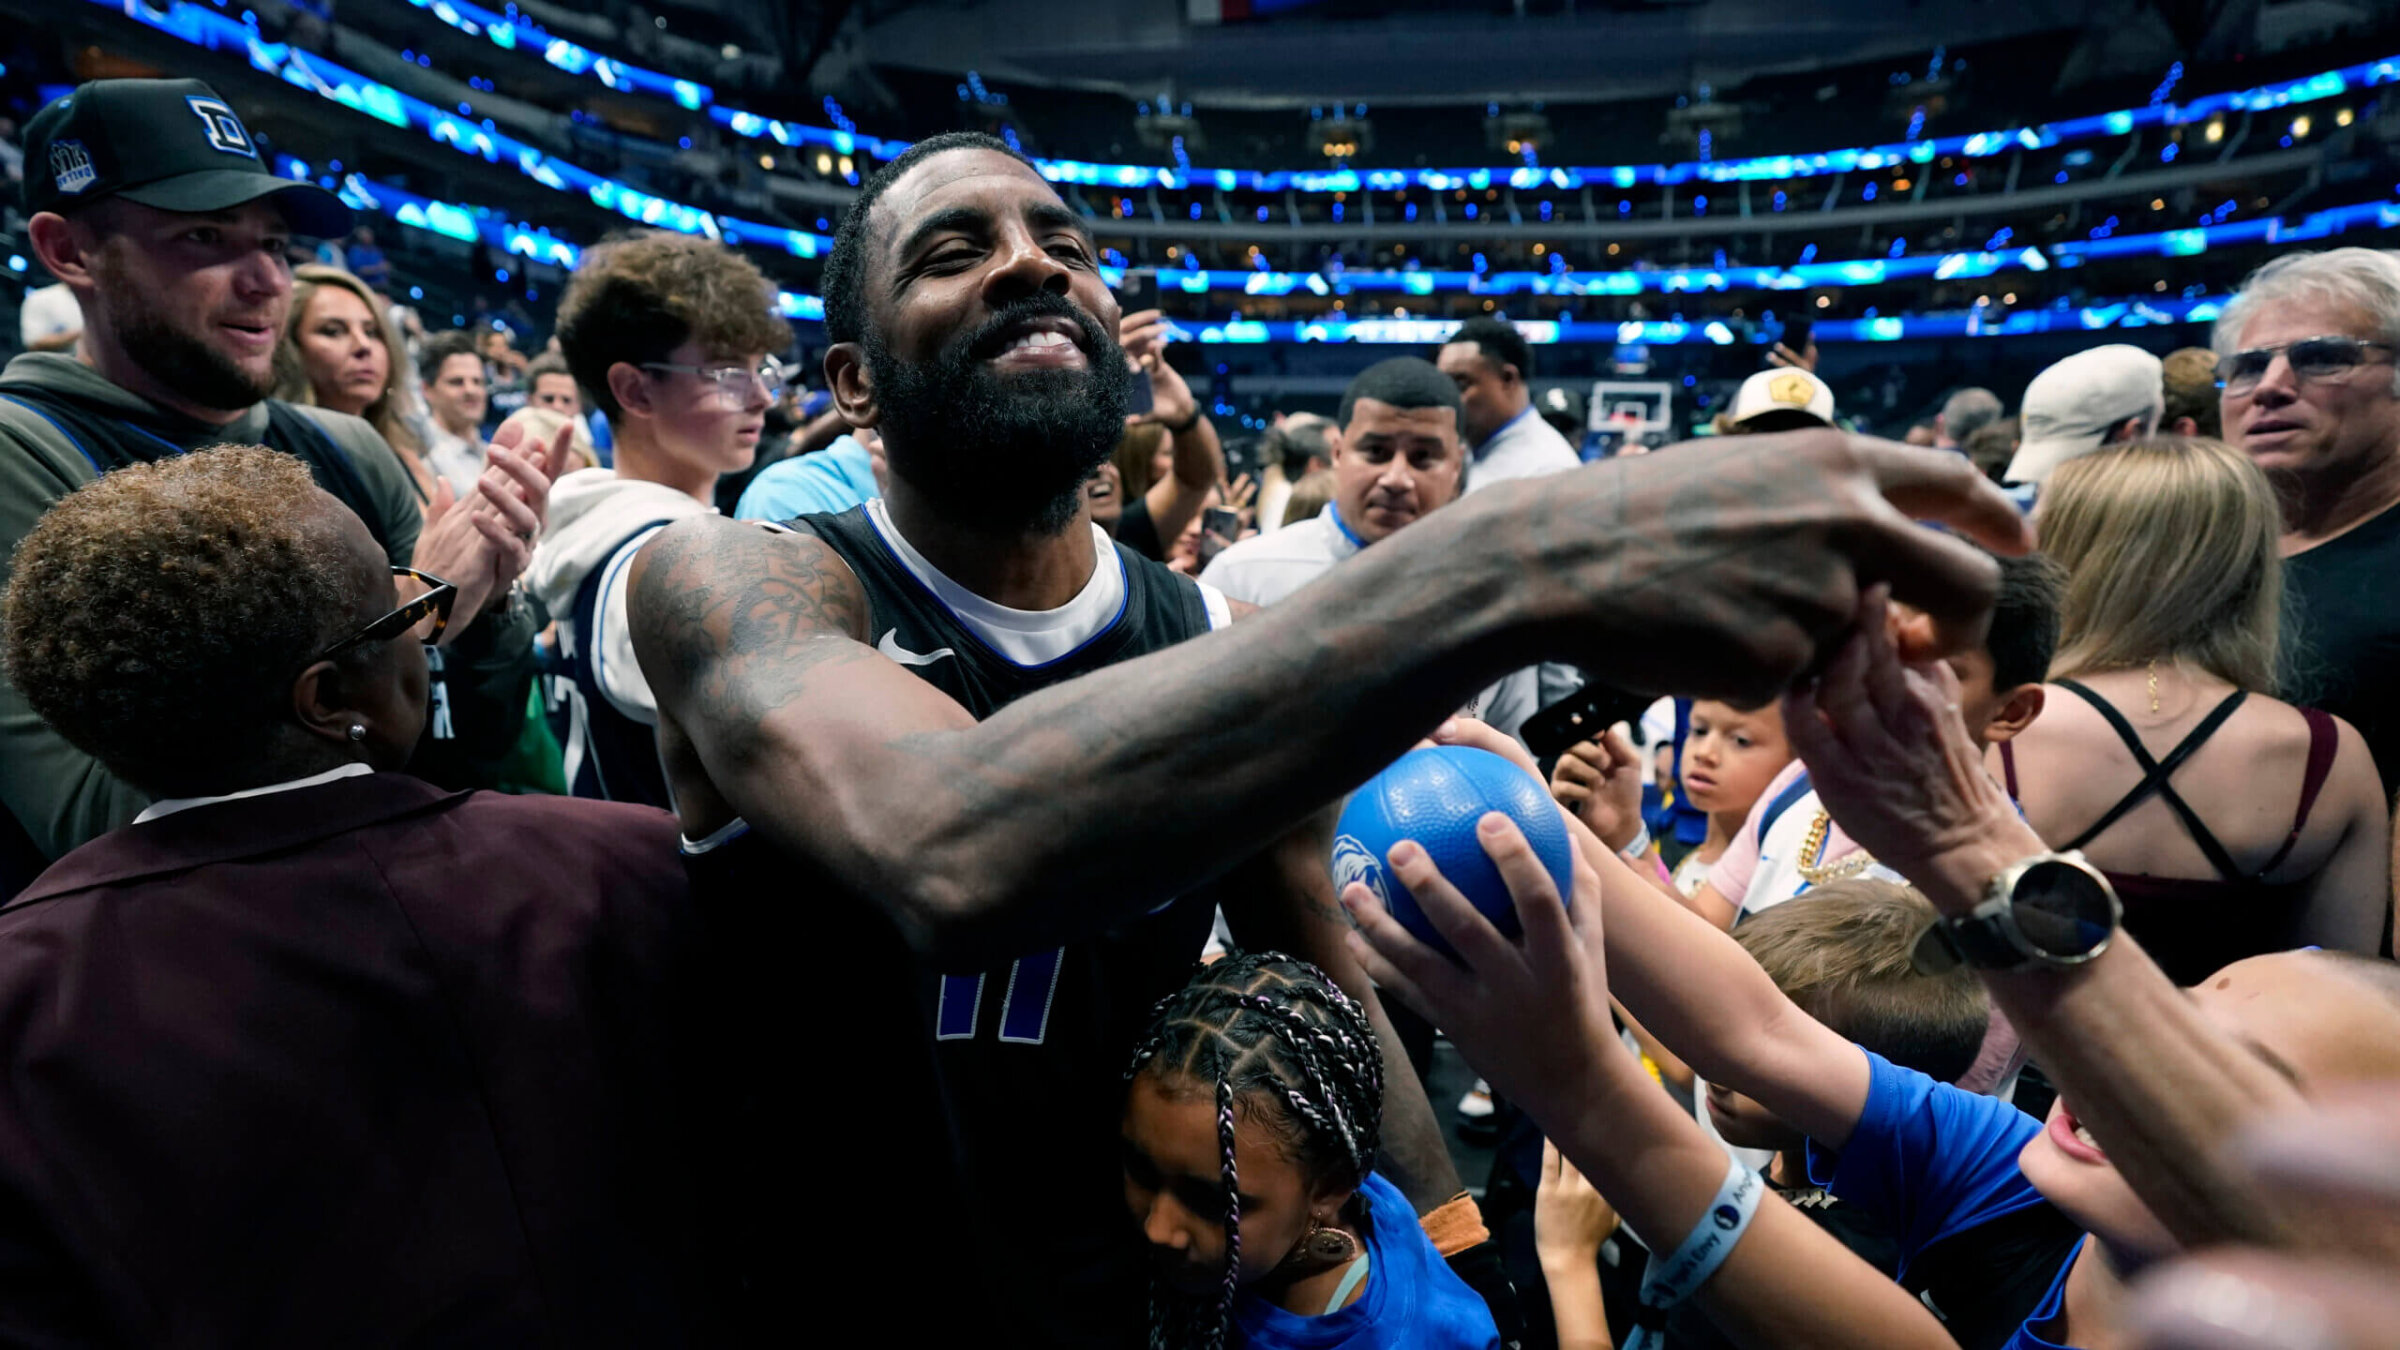 Kyrie Irving leaves the court after the Dallas Mavericks defeated the Oklahoma City Thunder in the Western Conference semifinals.